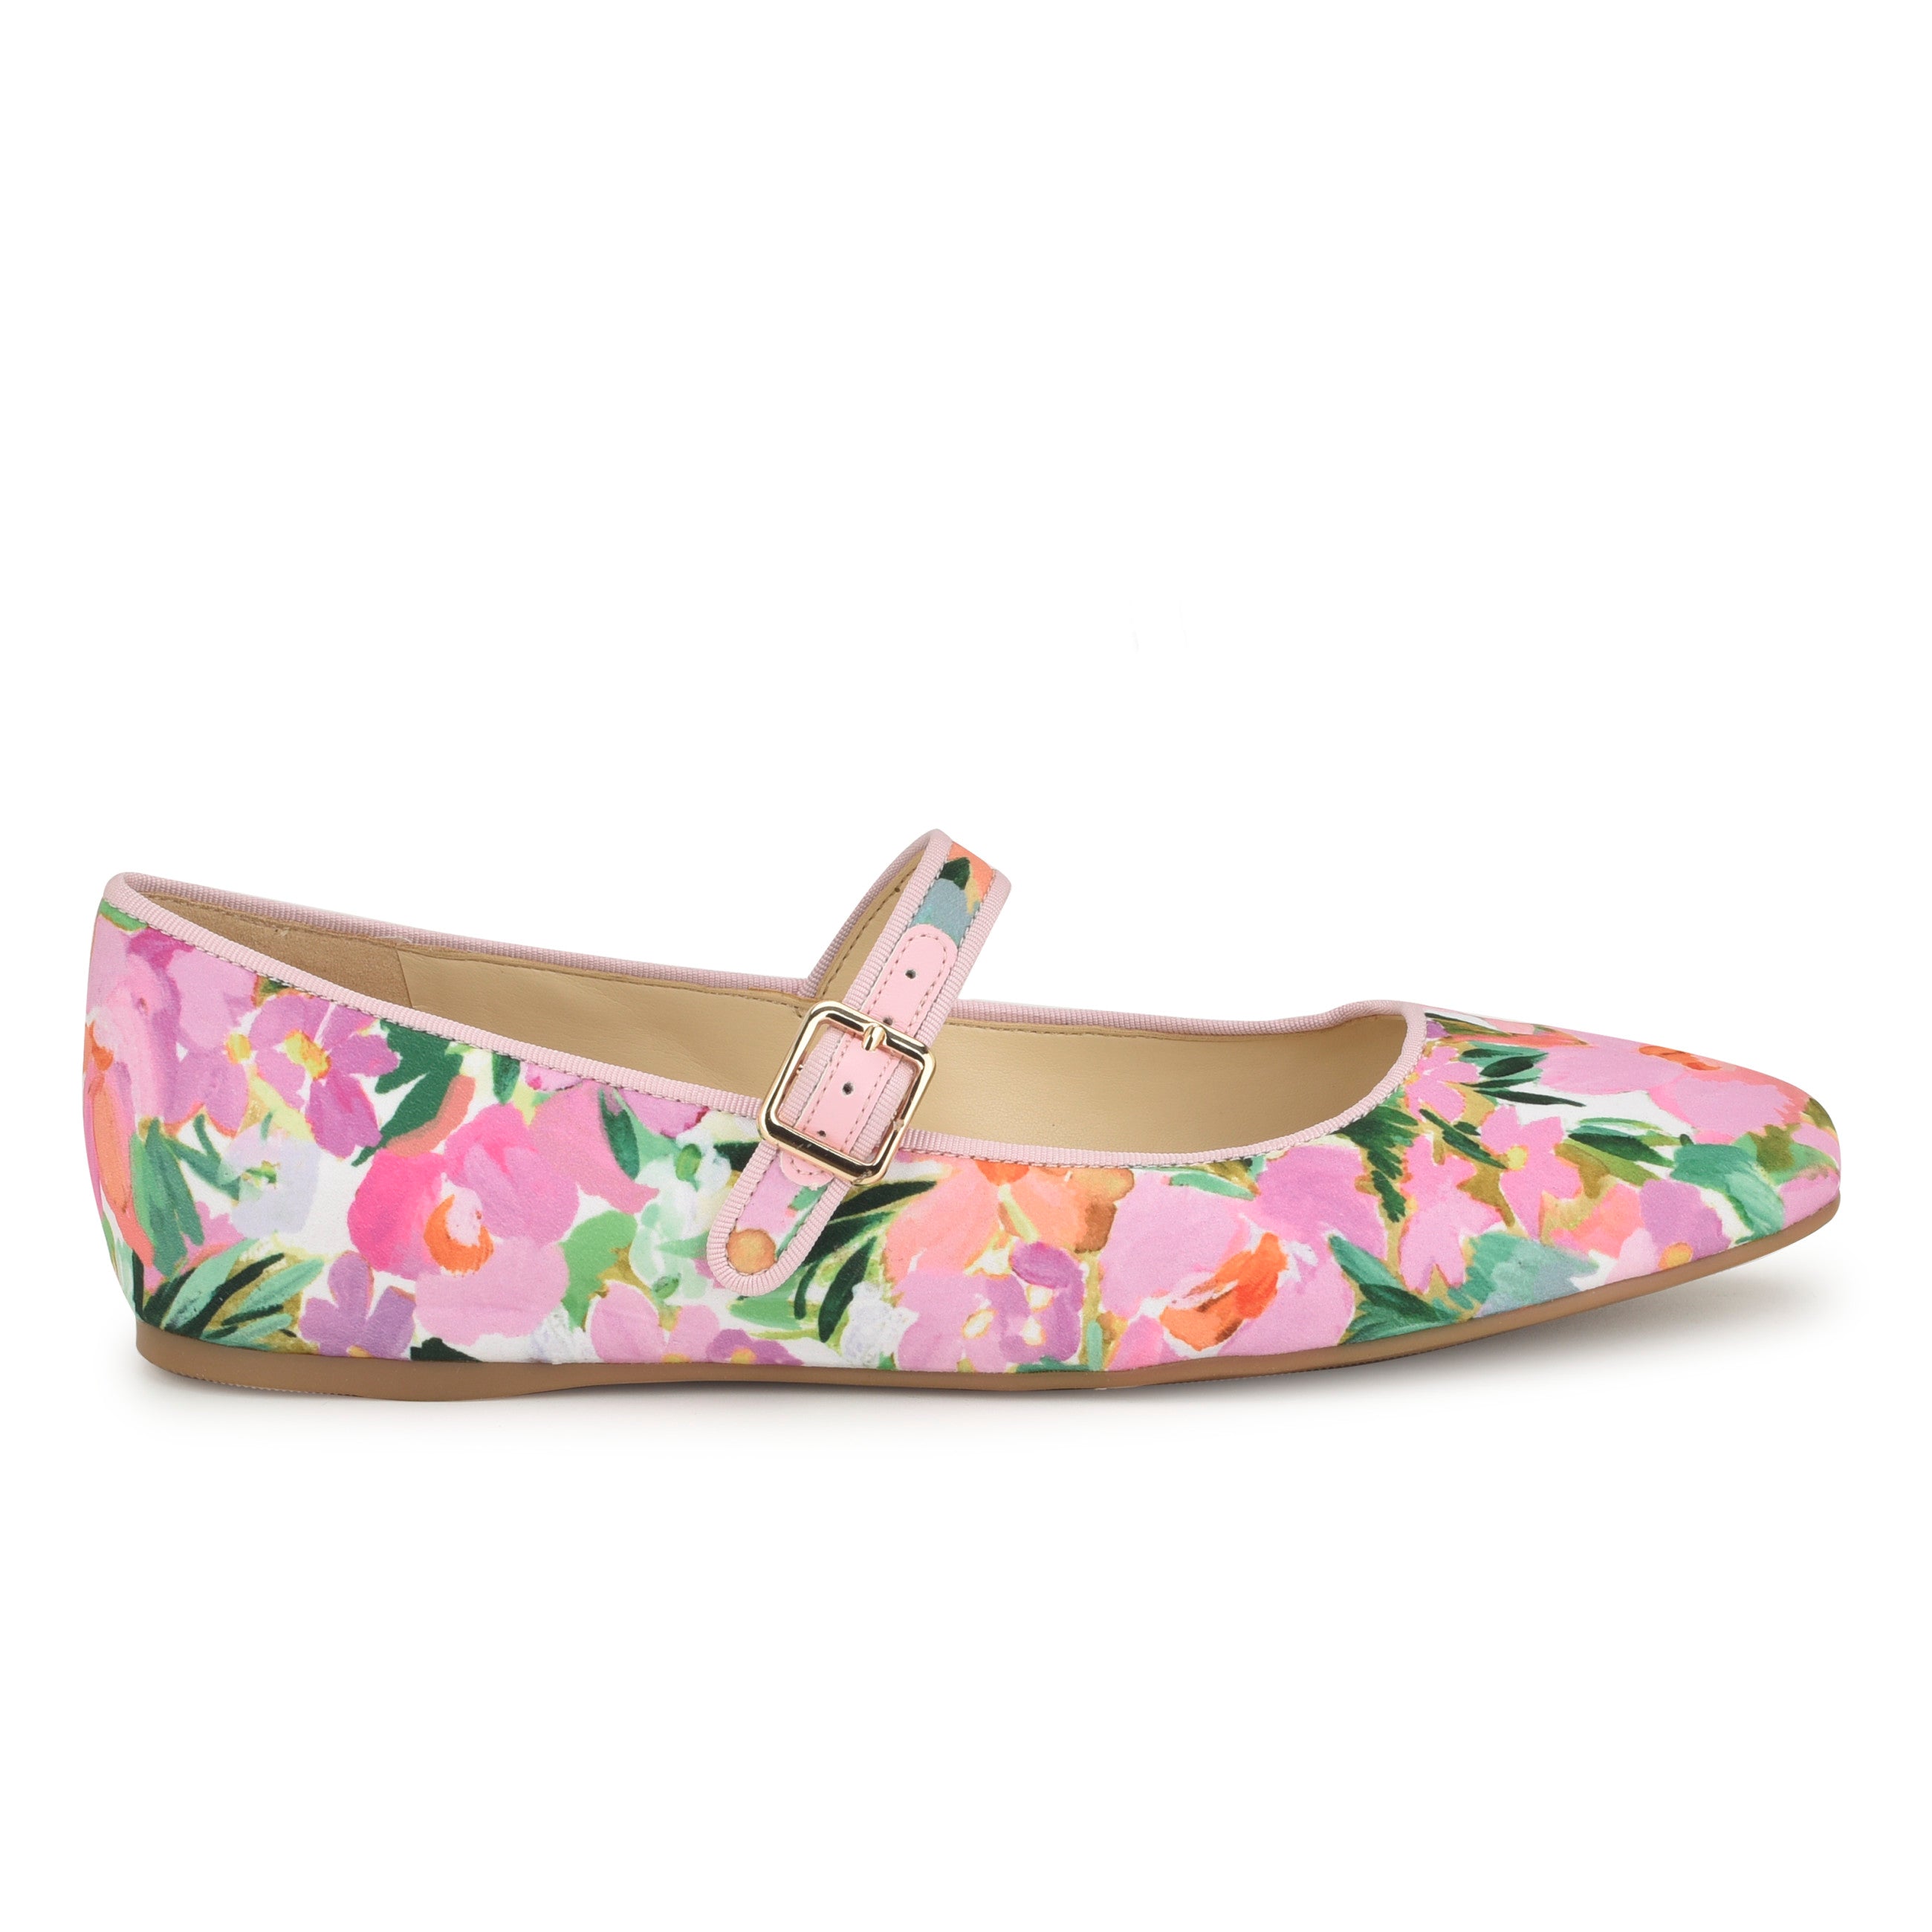 Women's Floral Mary Jane Shoes Pointed Toe Flats